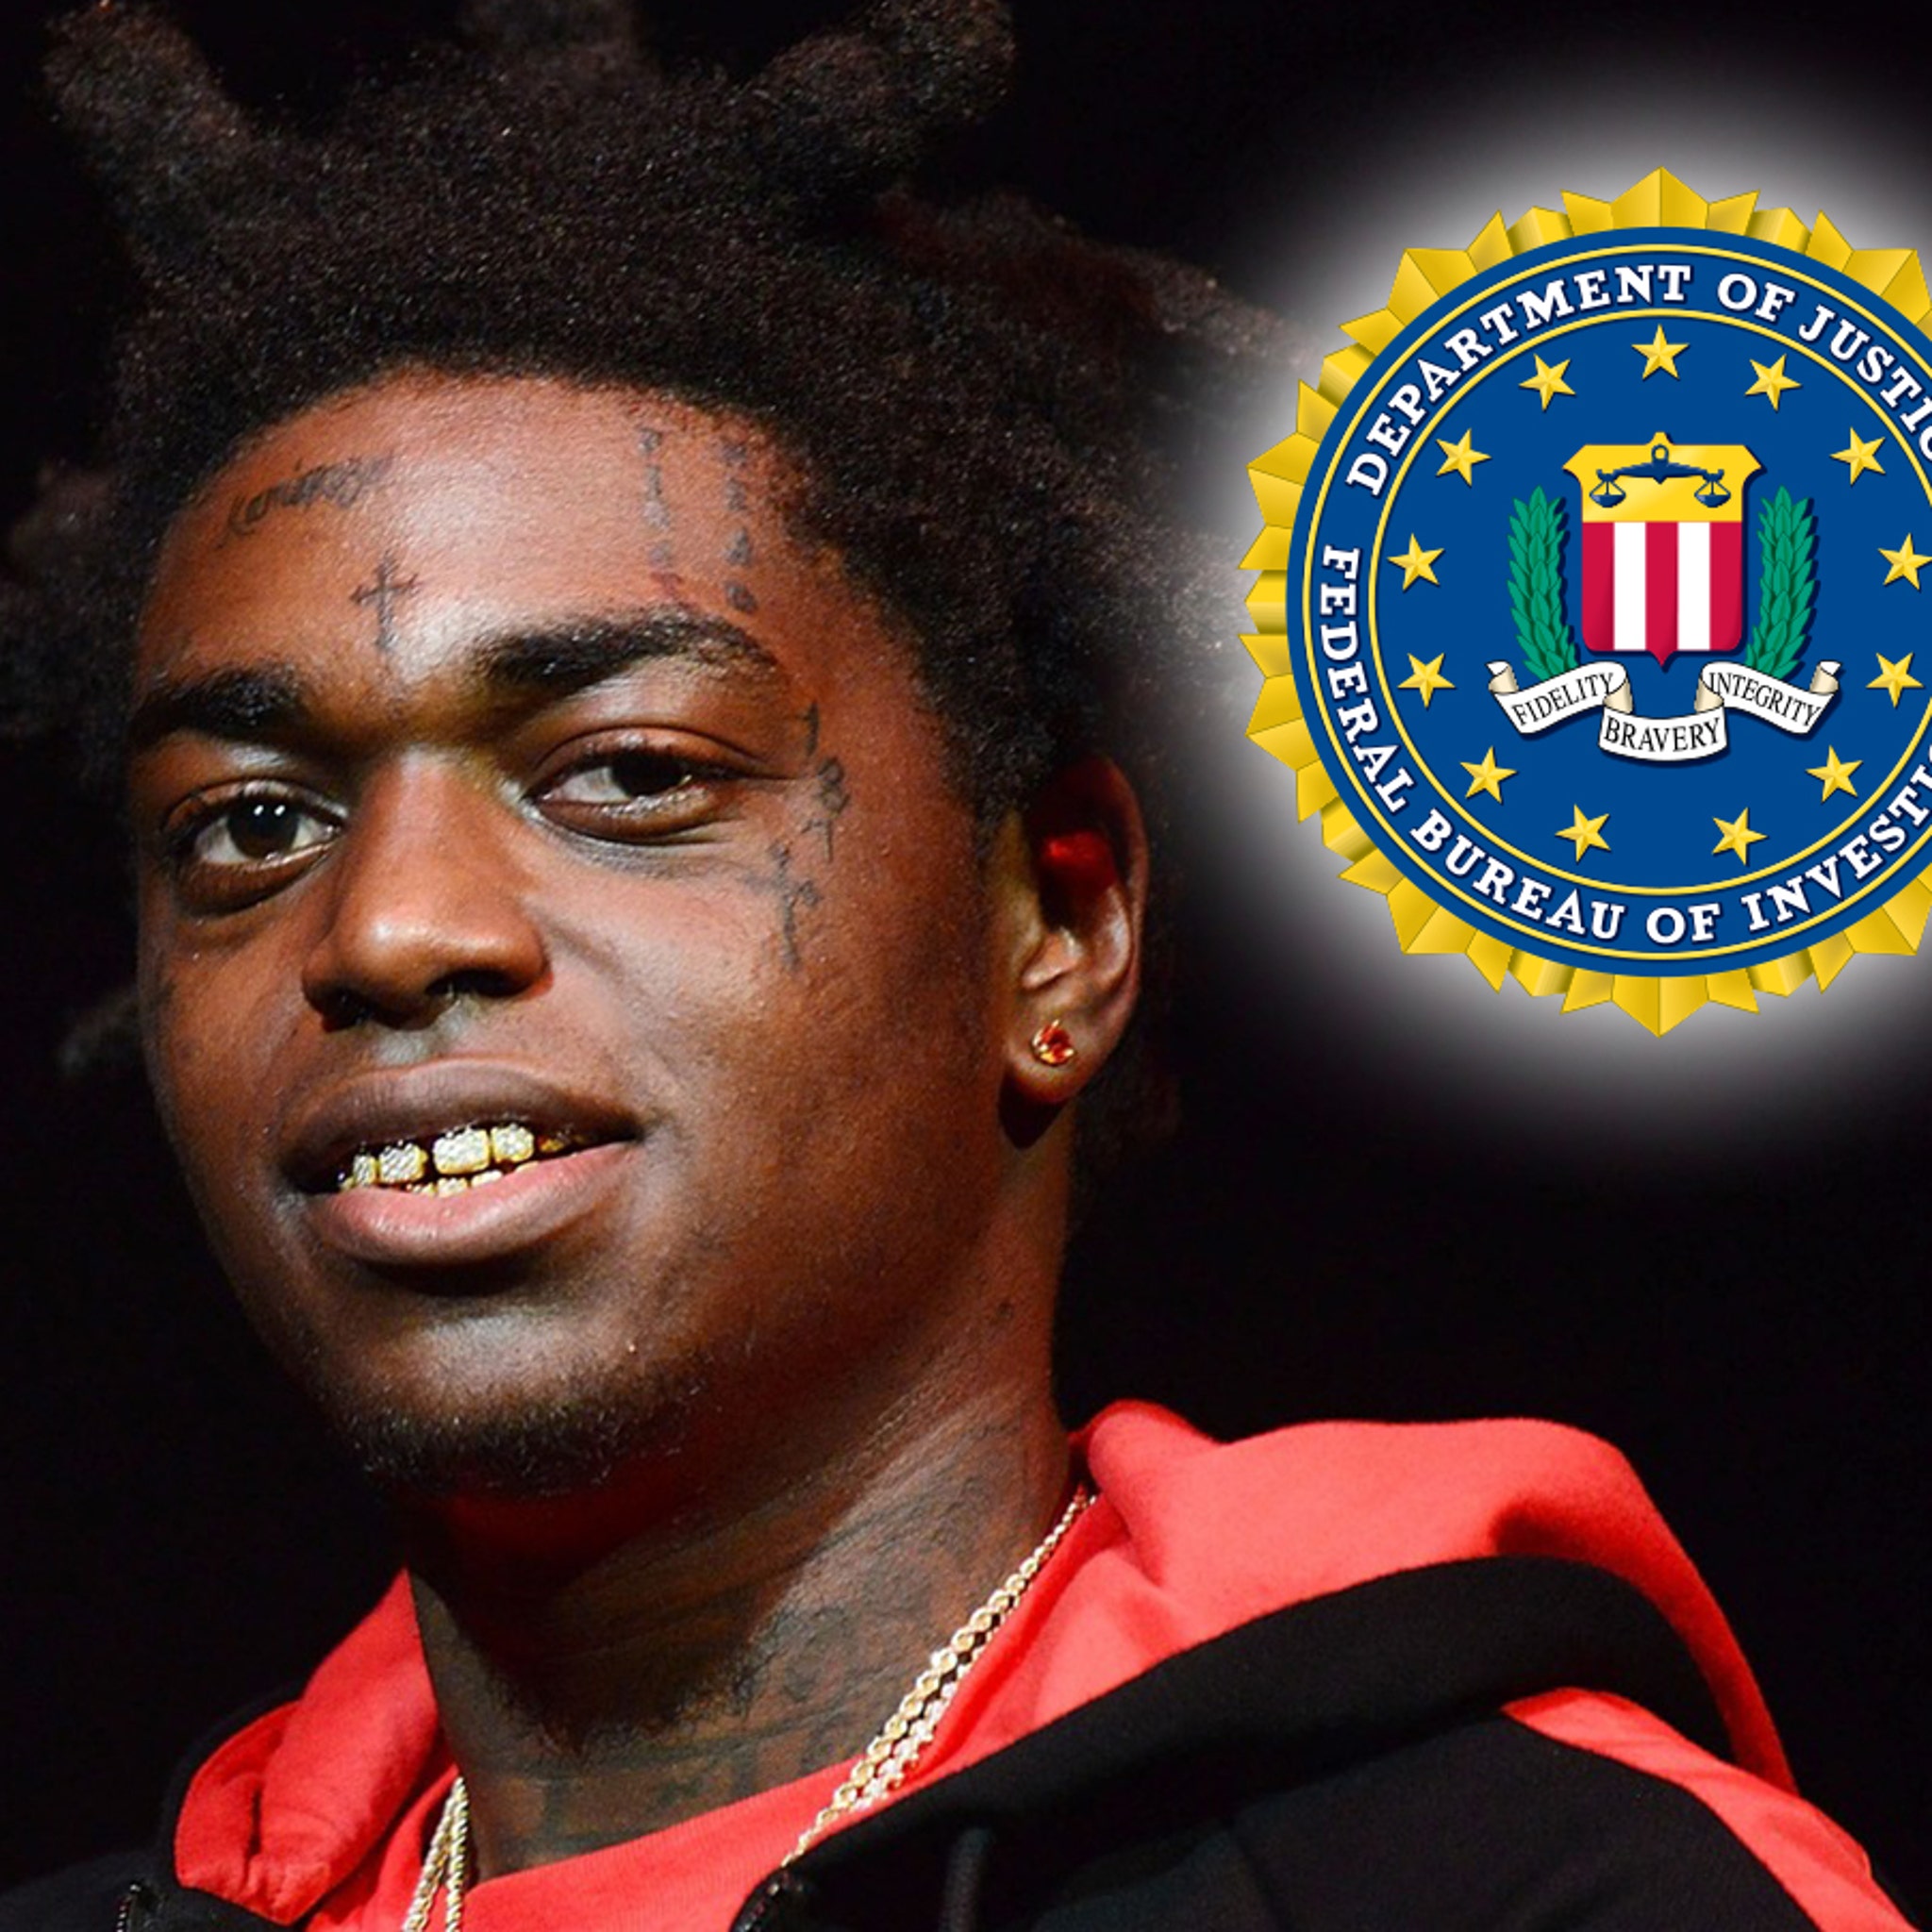 Kodak Black Offers to Pay College Tuition for Kids of Slain FBI Agents